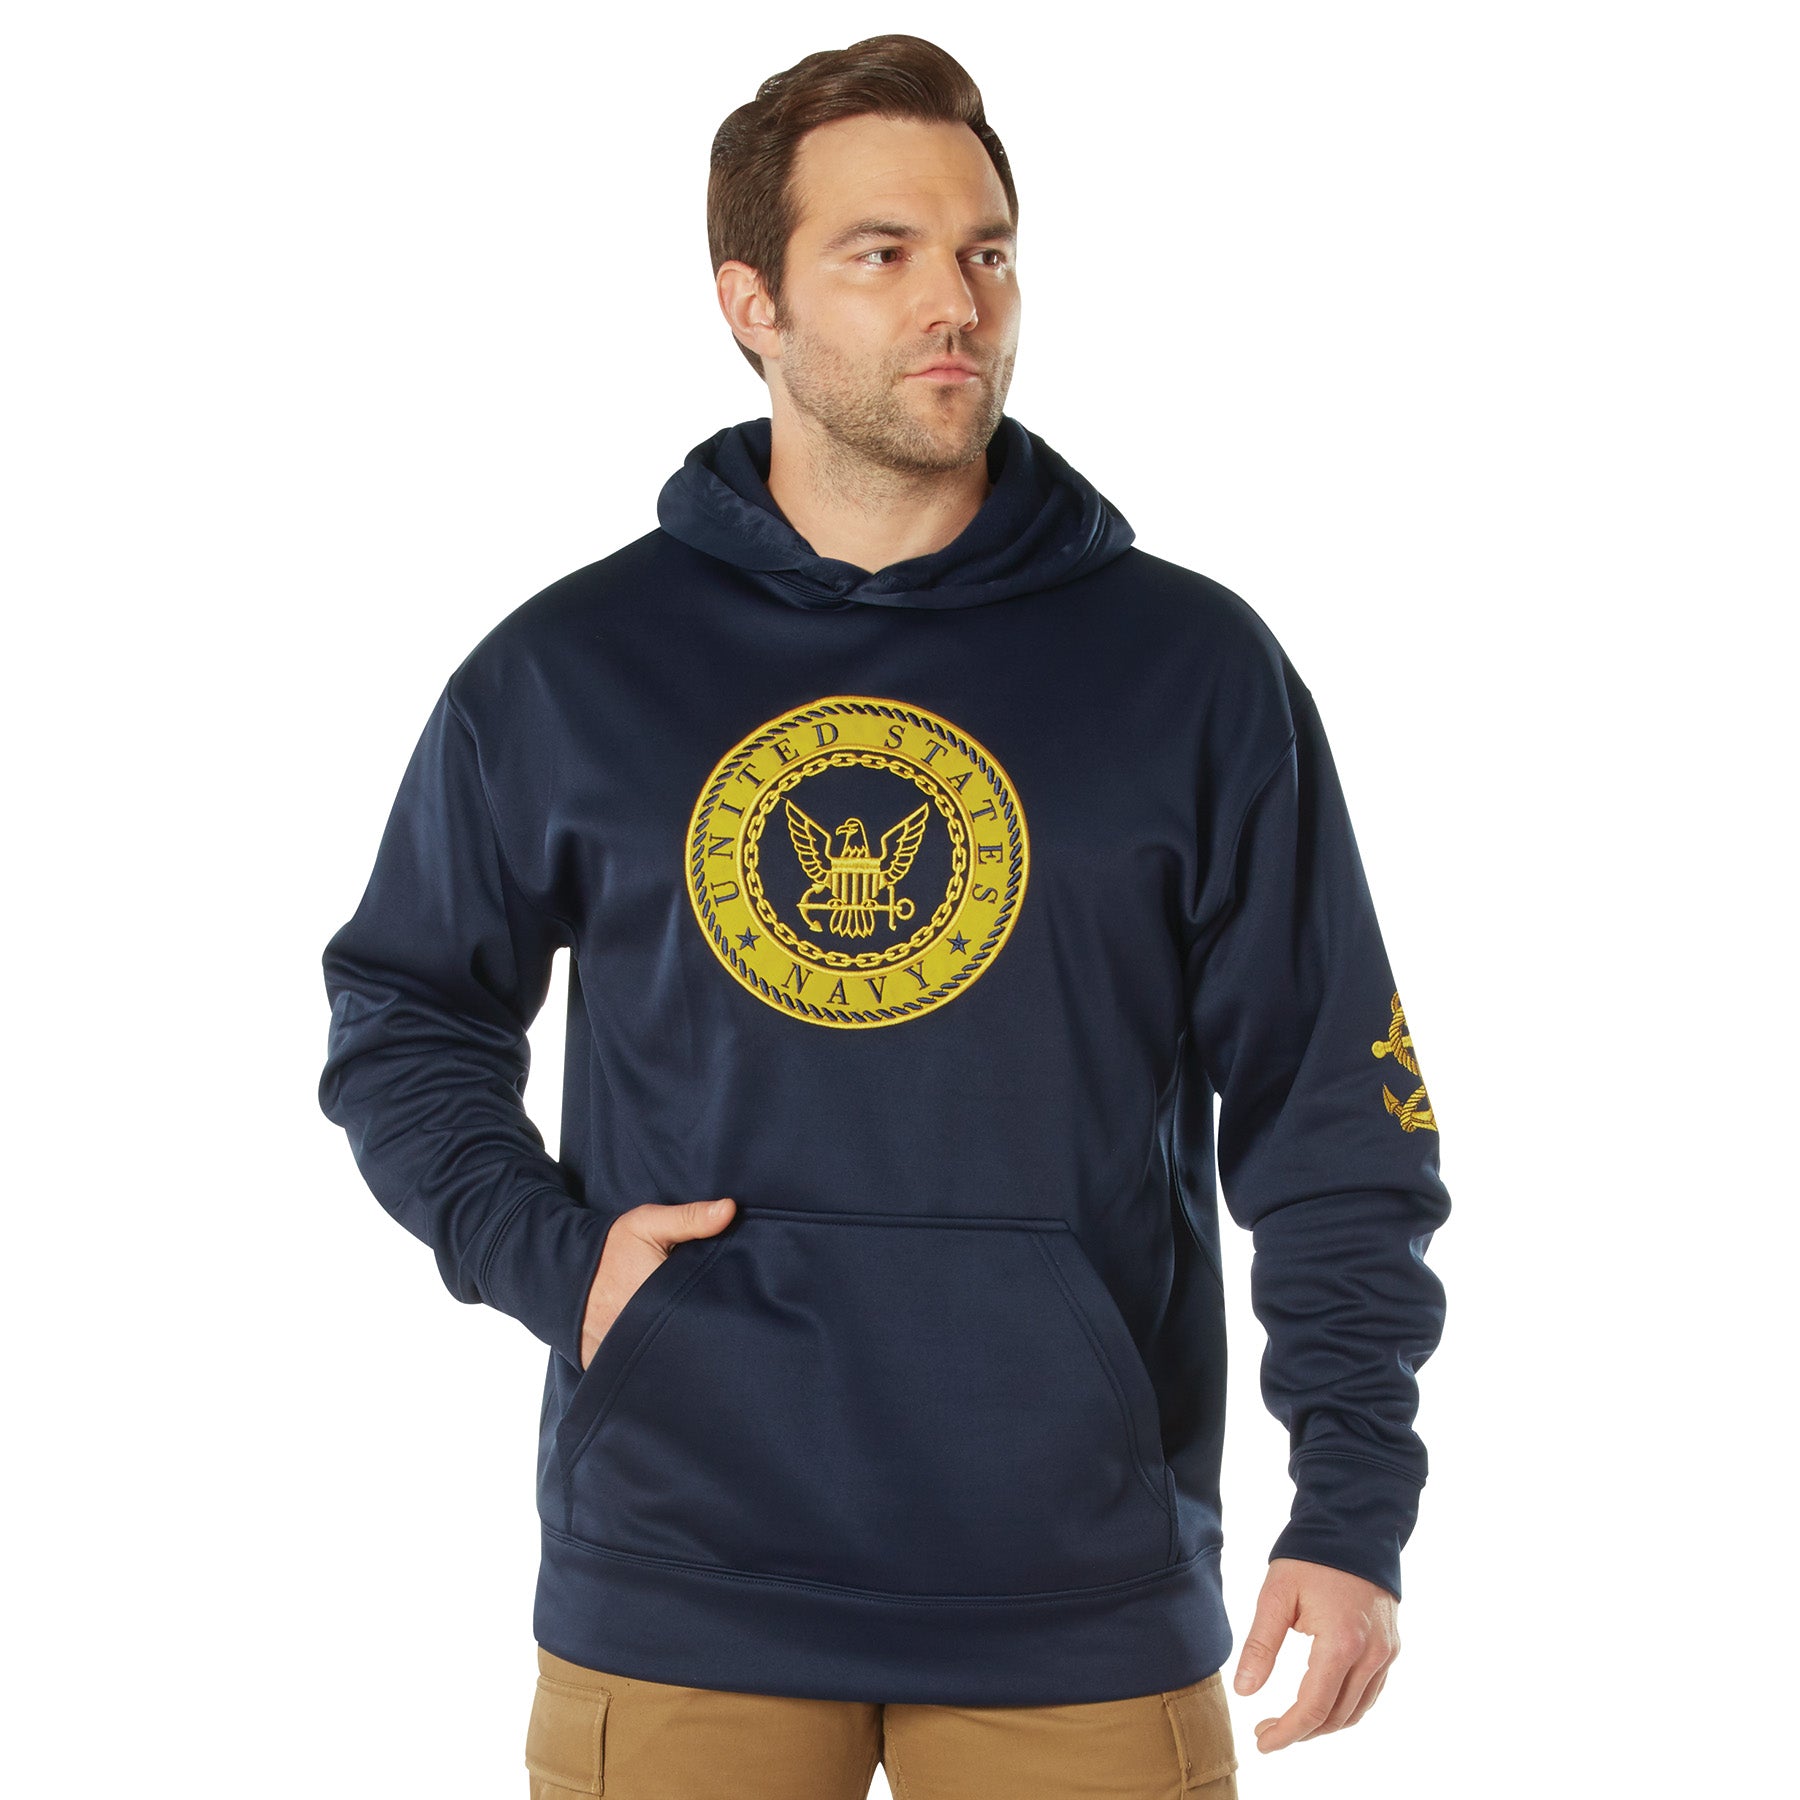 Poly Military Navy Emblem Embroidered Hooded Sweatshirts Navy Blue